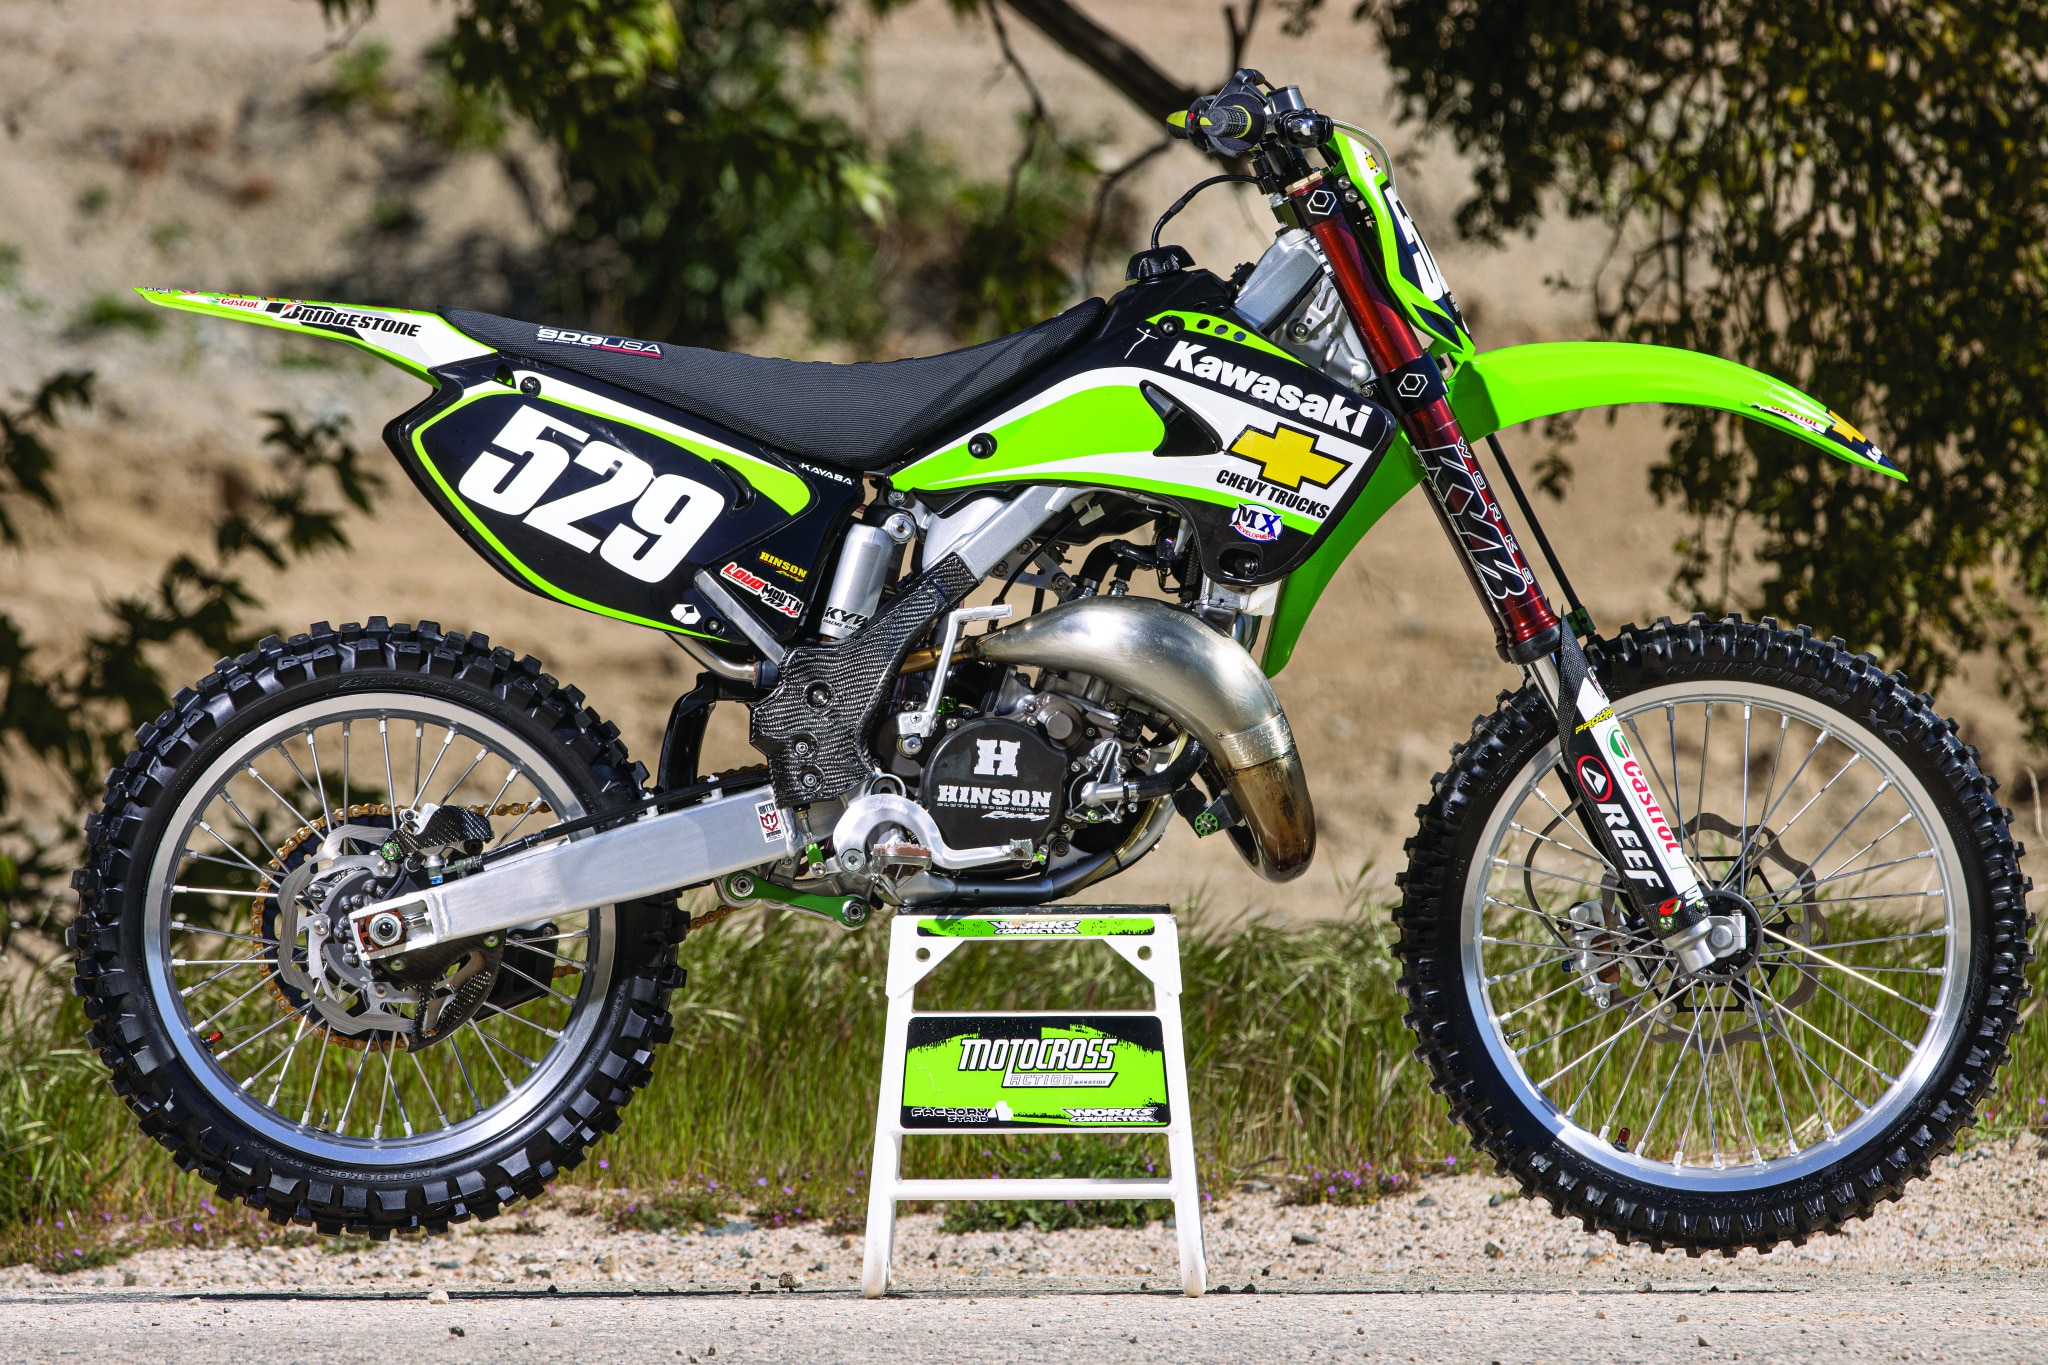 ONE MAN'S QUEST TO A 2003 KX125 TWO-STROKE - Motocross Magazine